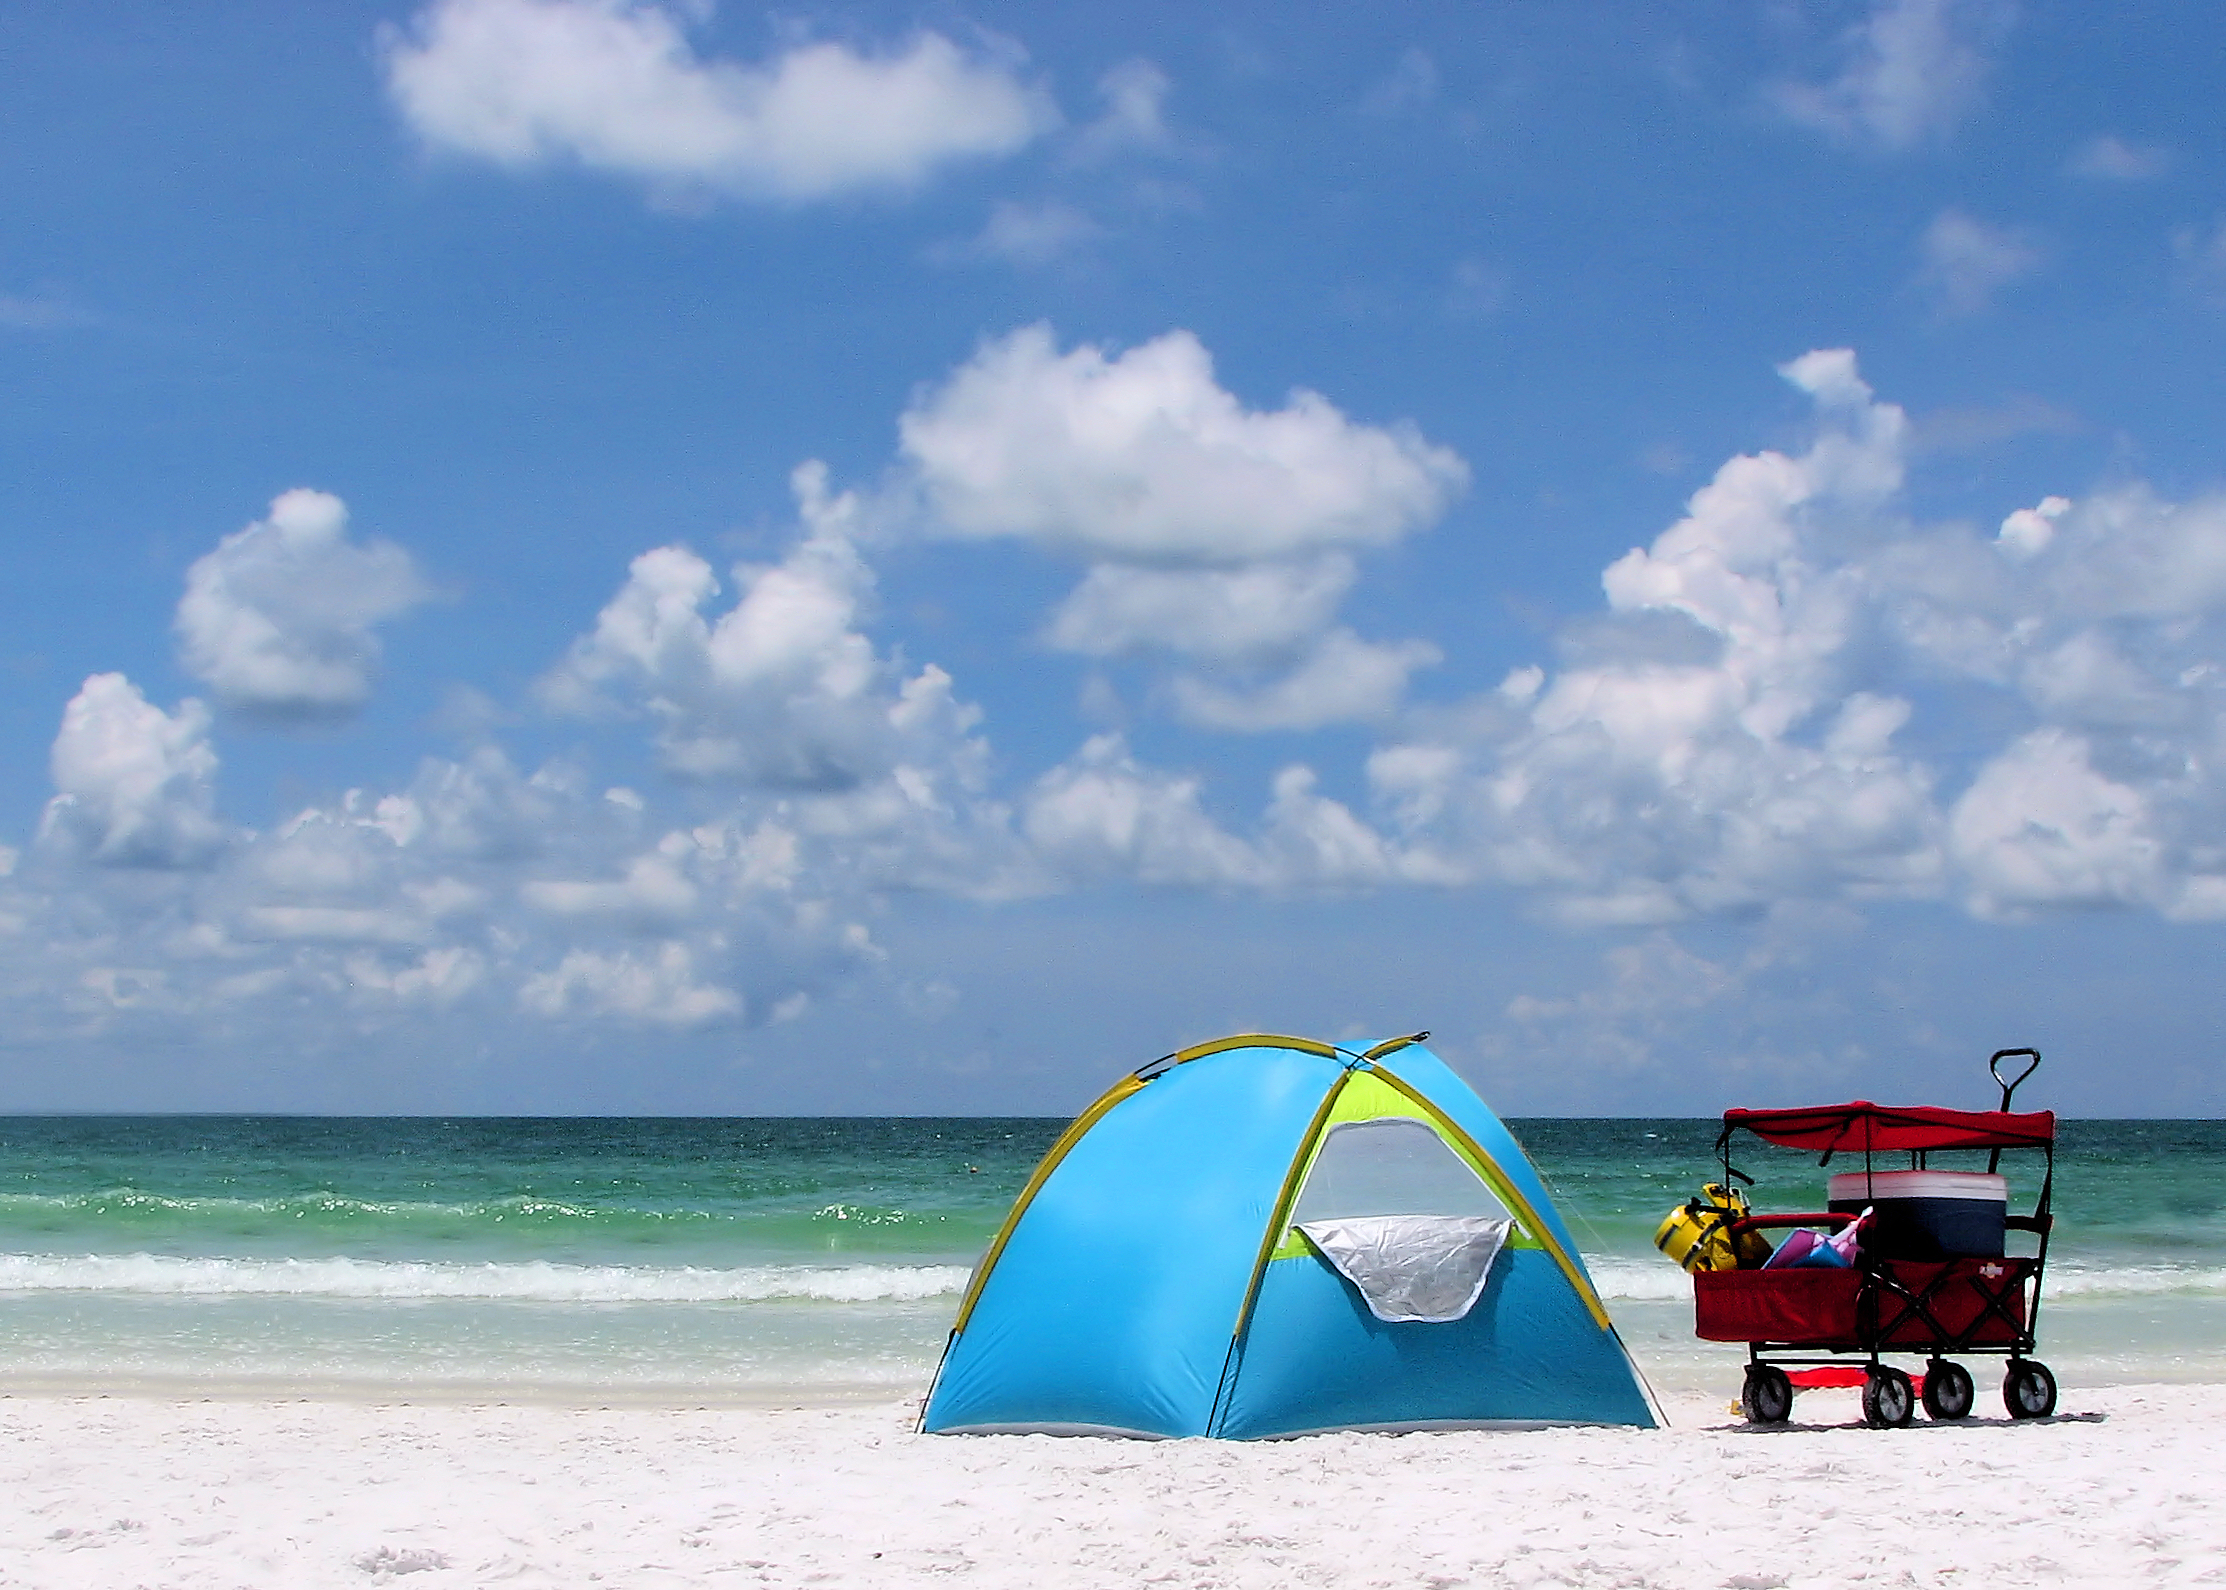 A tent and buggy on a beach, Objects, Water, Vacation, Themes, HQ Photo